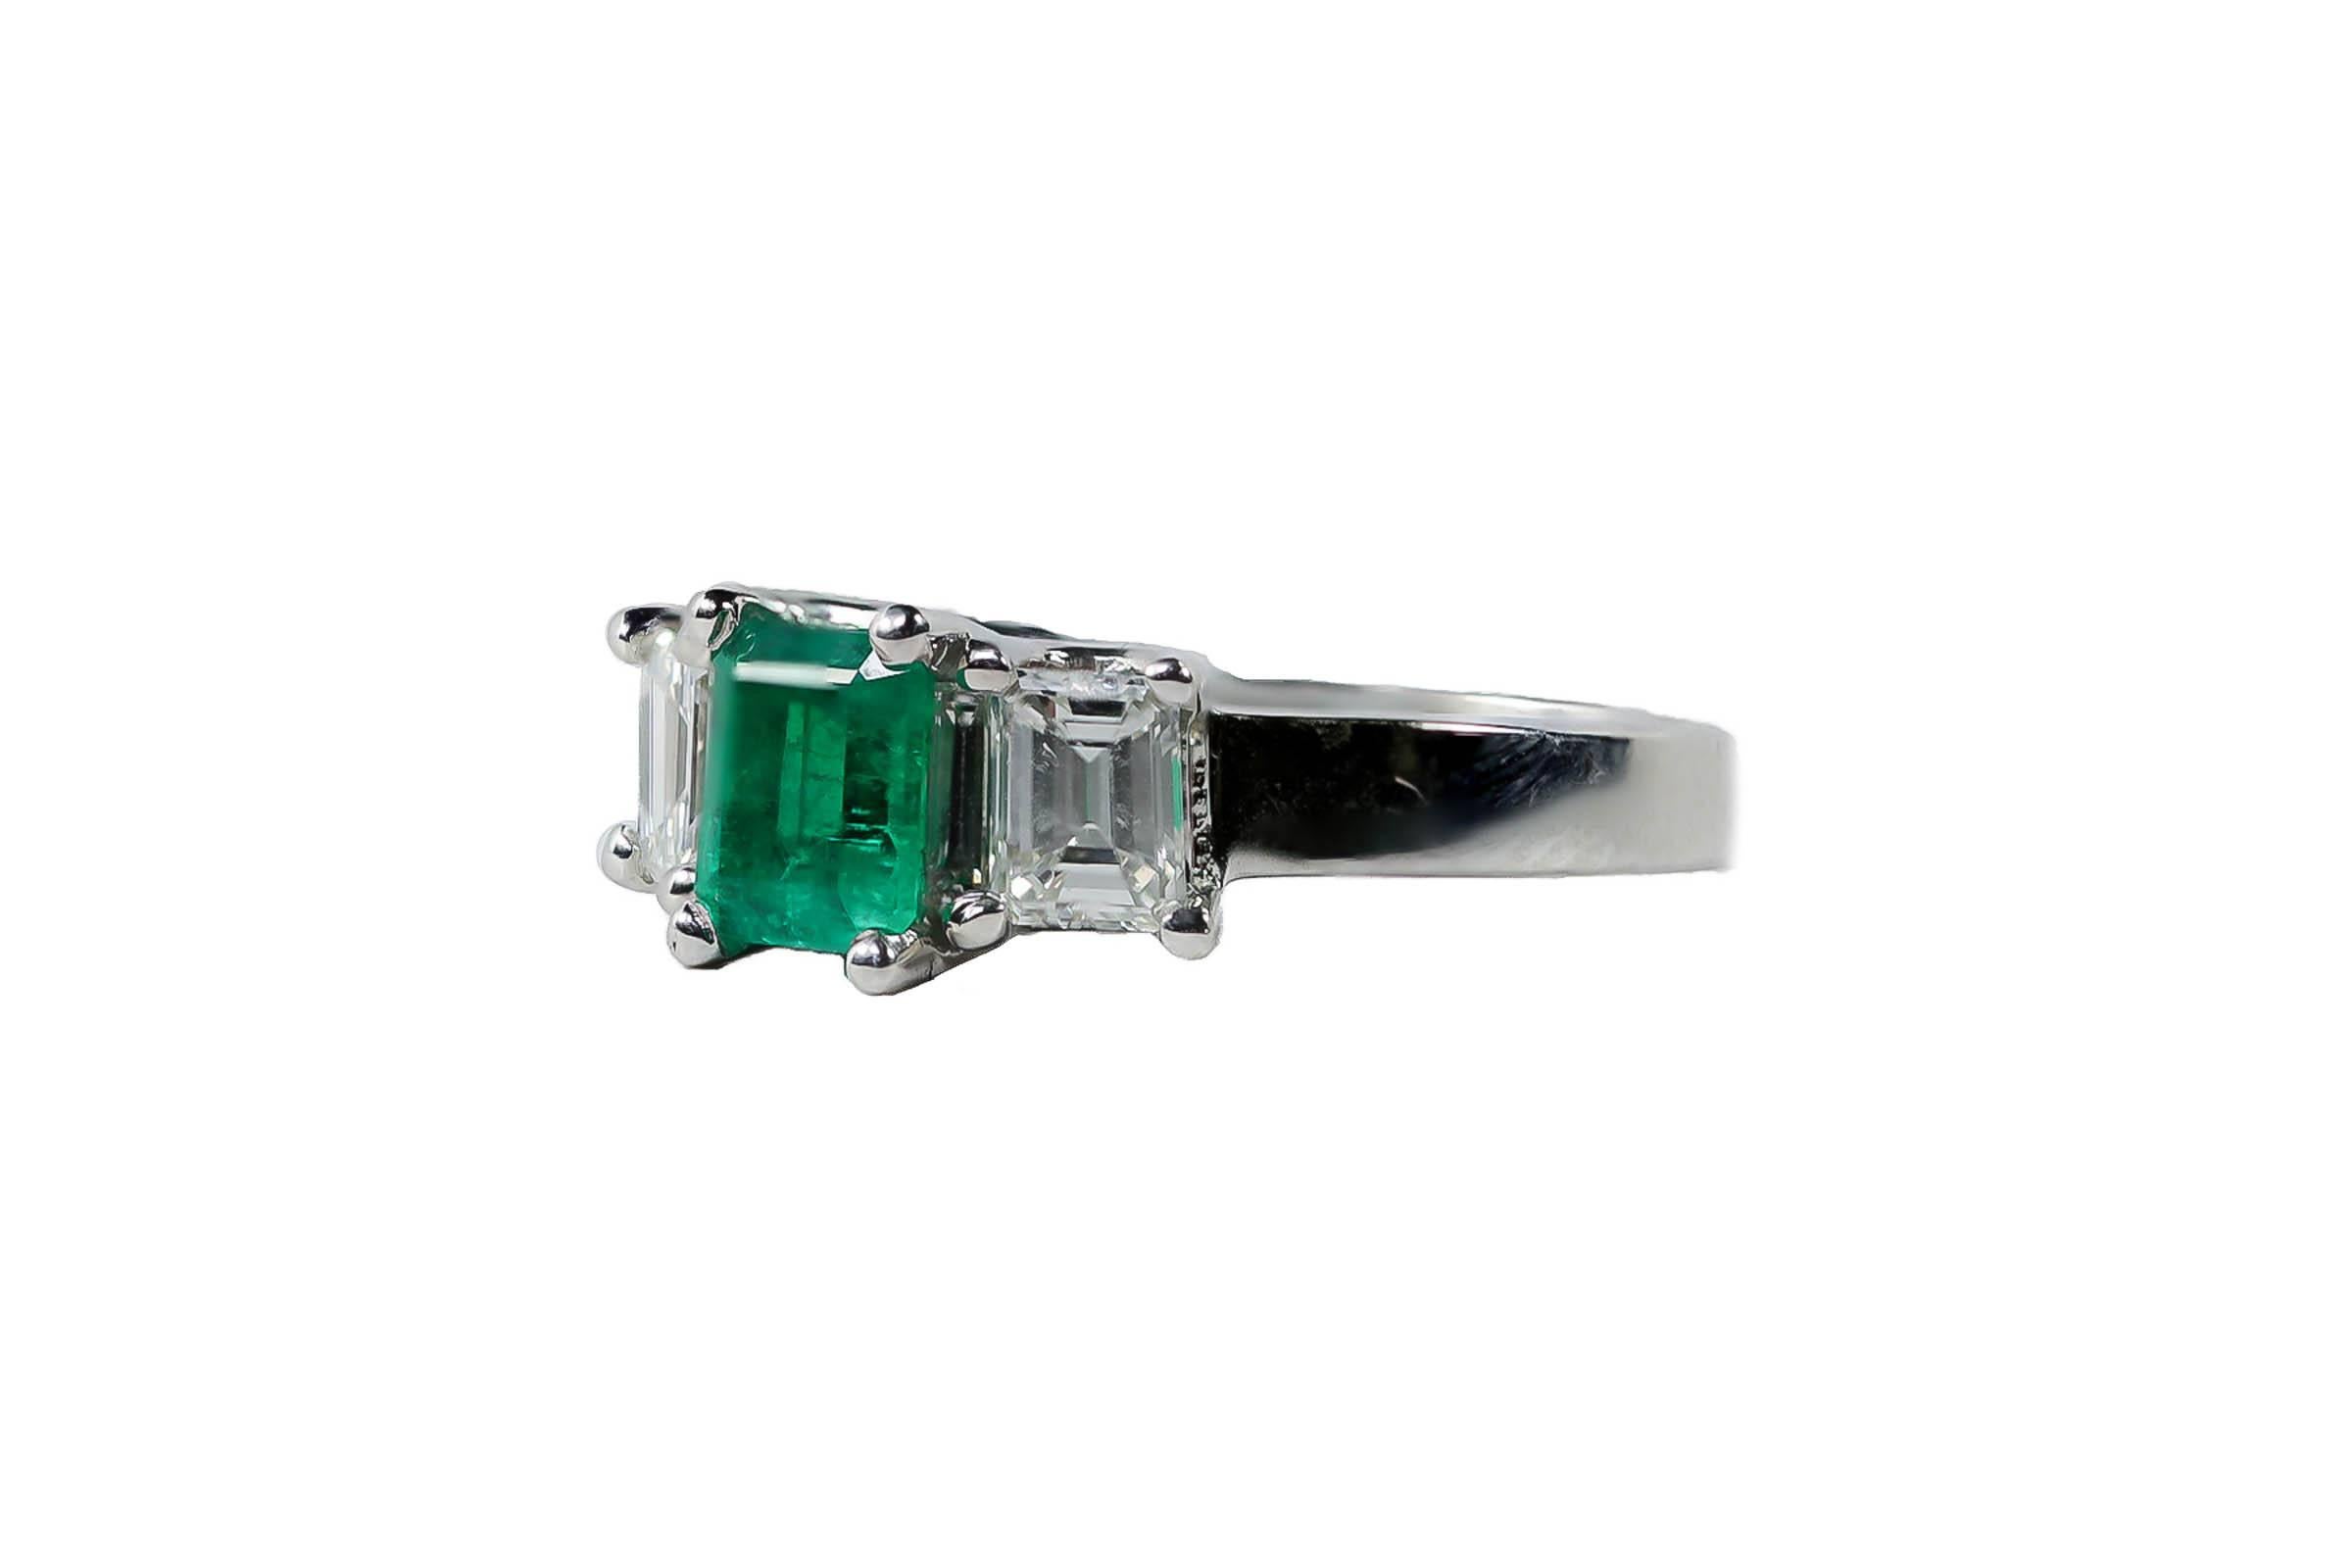 18K white gold ring containing an emerald cut emerald weighing 0.96 carat and two emerald cut diamonds weighing combined 0.96.
Size 6. Can be sized.